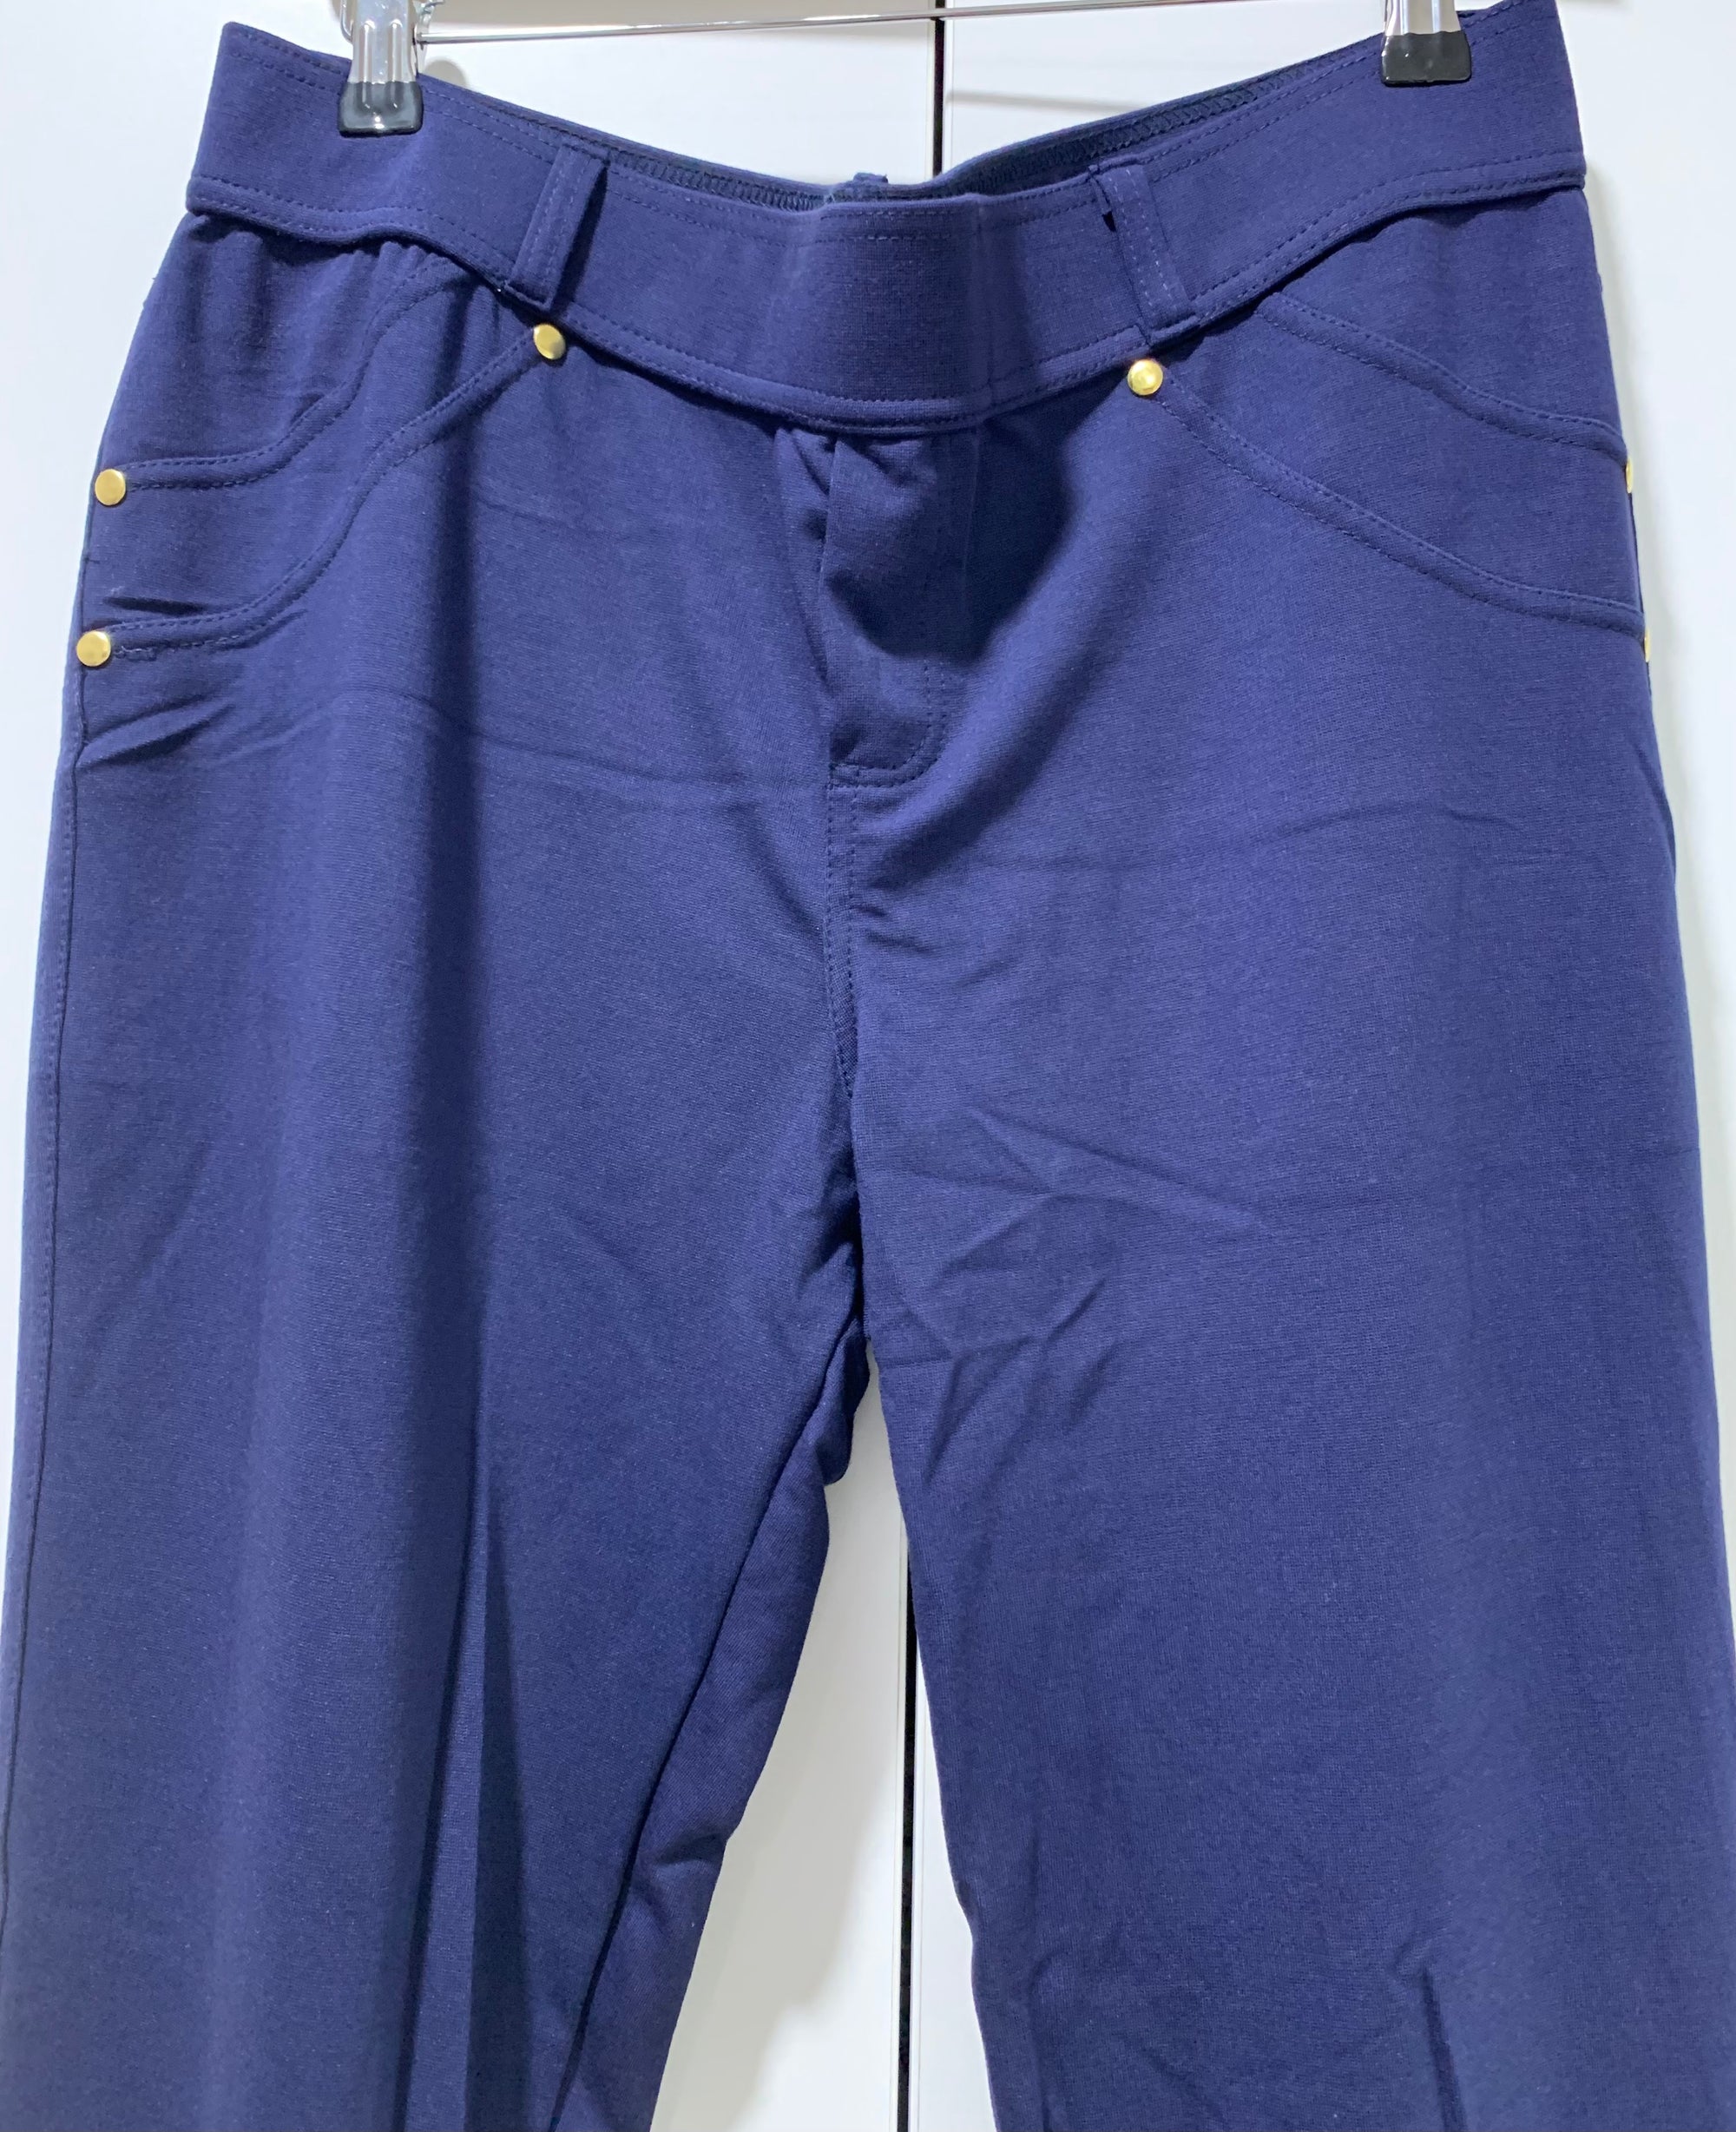 Pants with Four Way Stretch Super Elastic in Navy Blue with Gold Detail